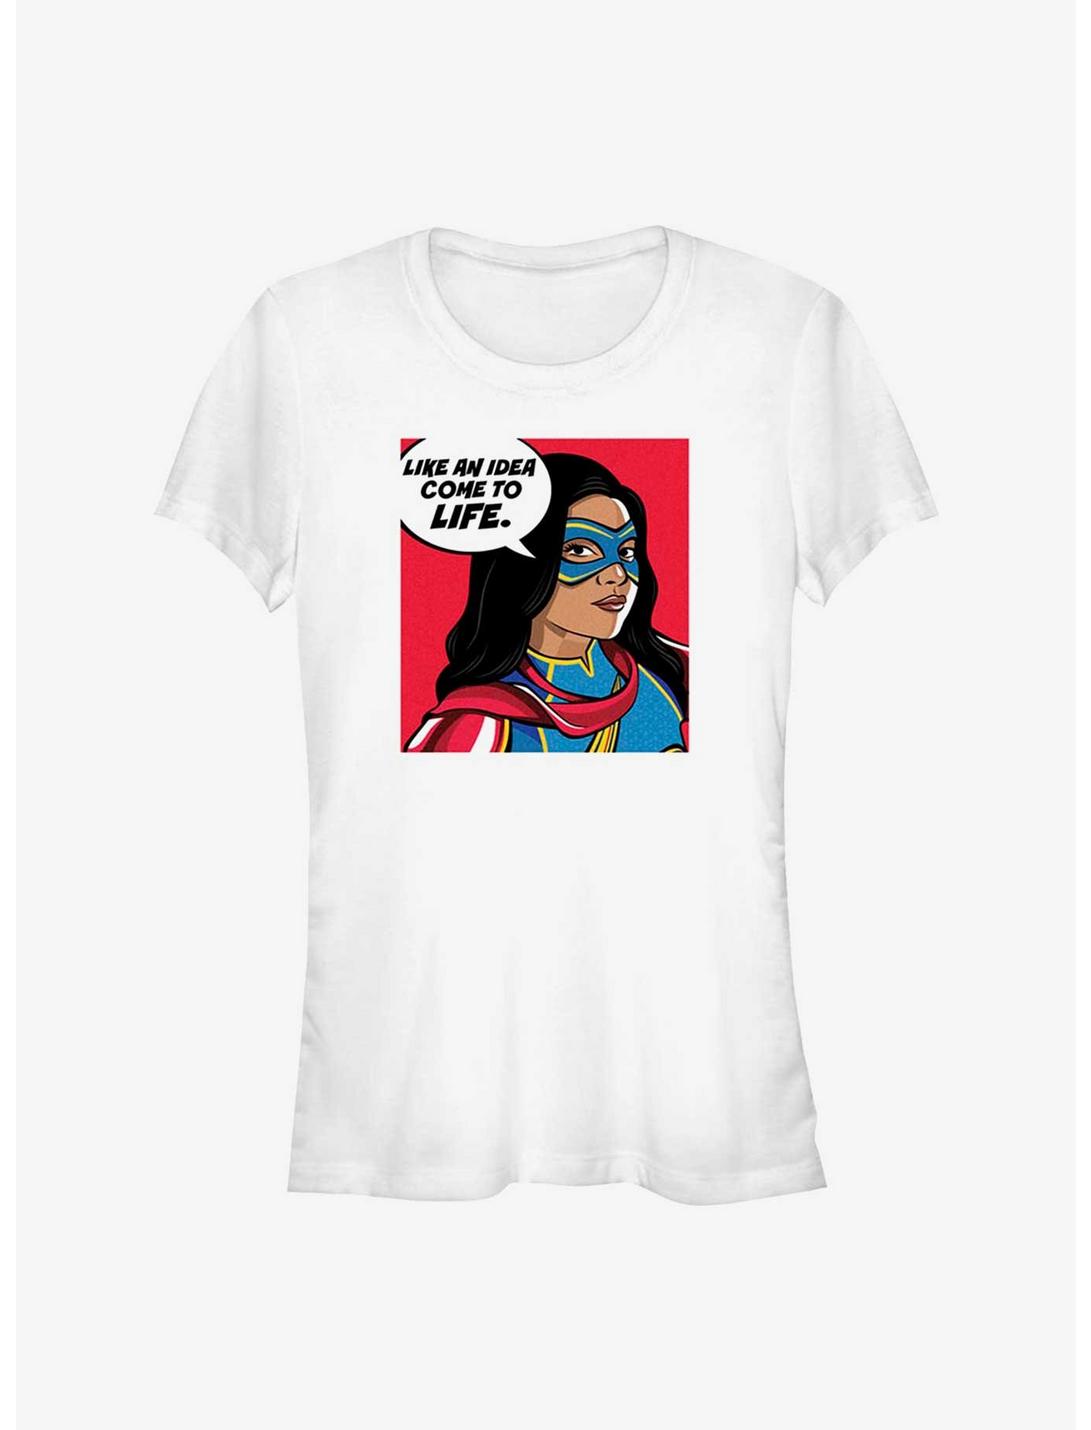 Marvel Ms. Marvel Idea Come To Life Girls T-Shirt, WHITE, hi-res